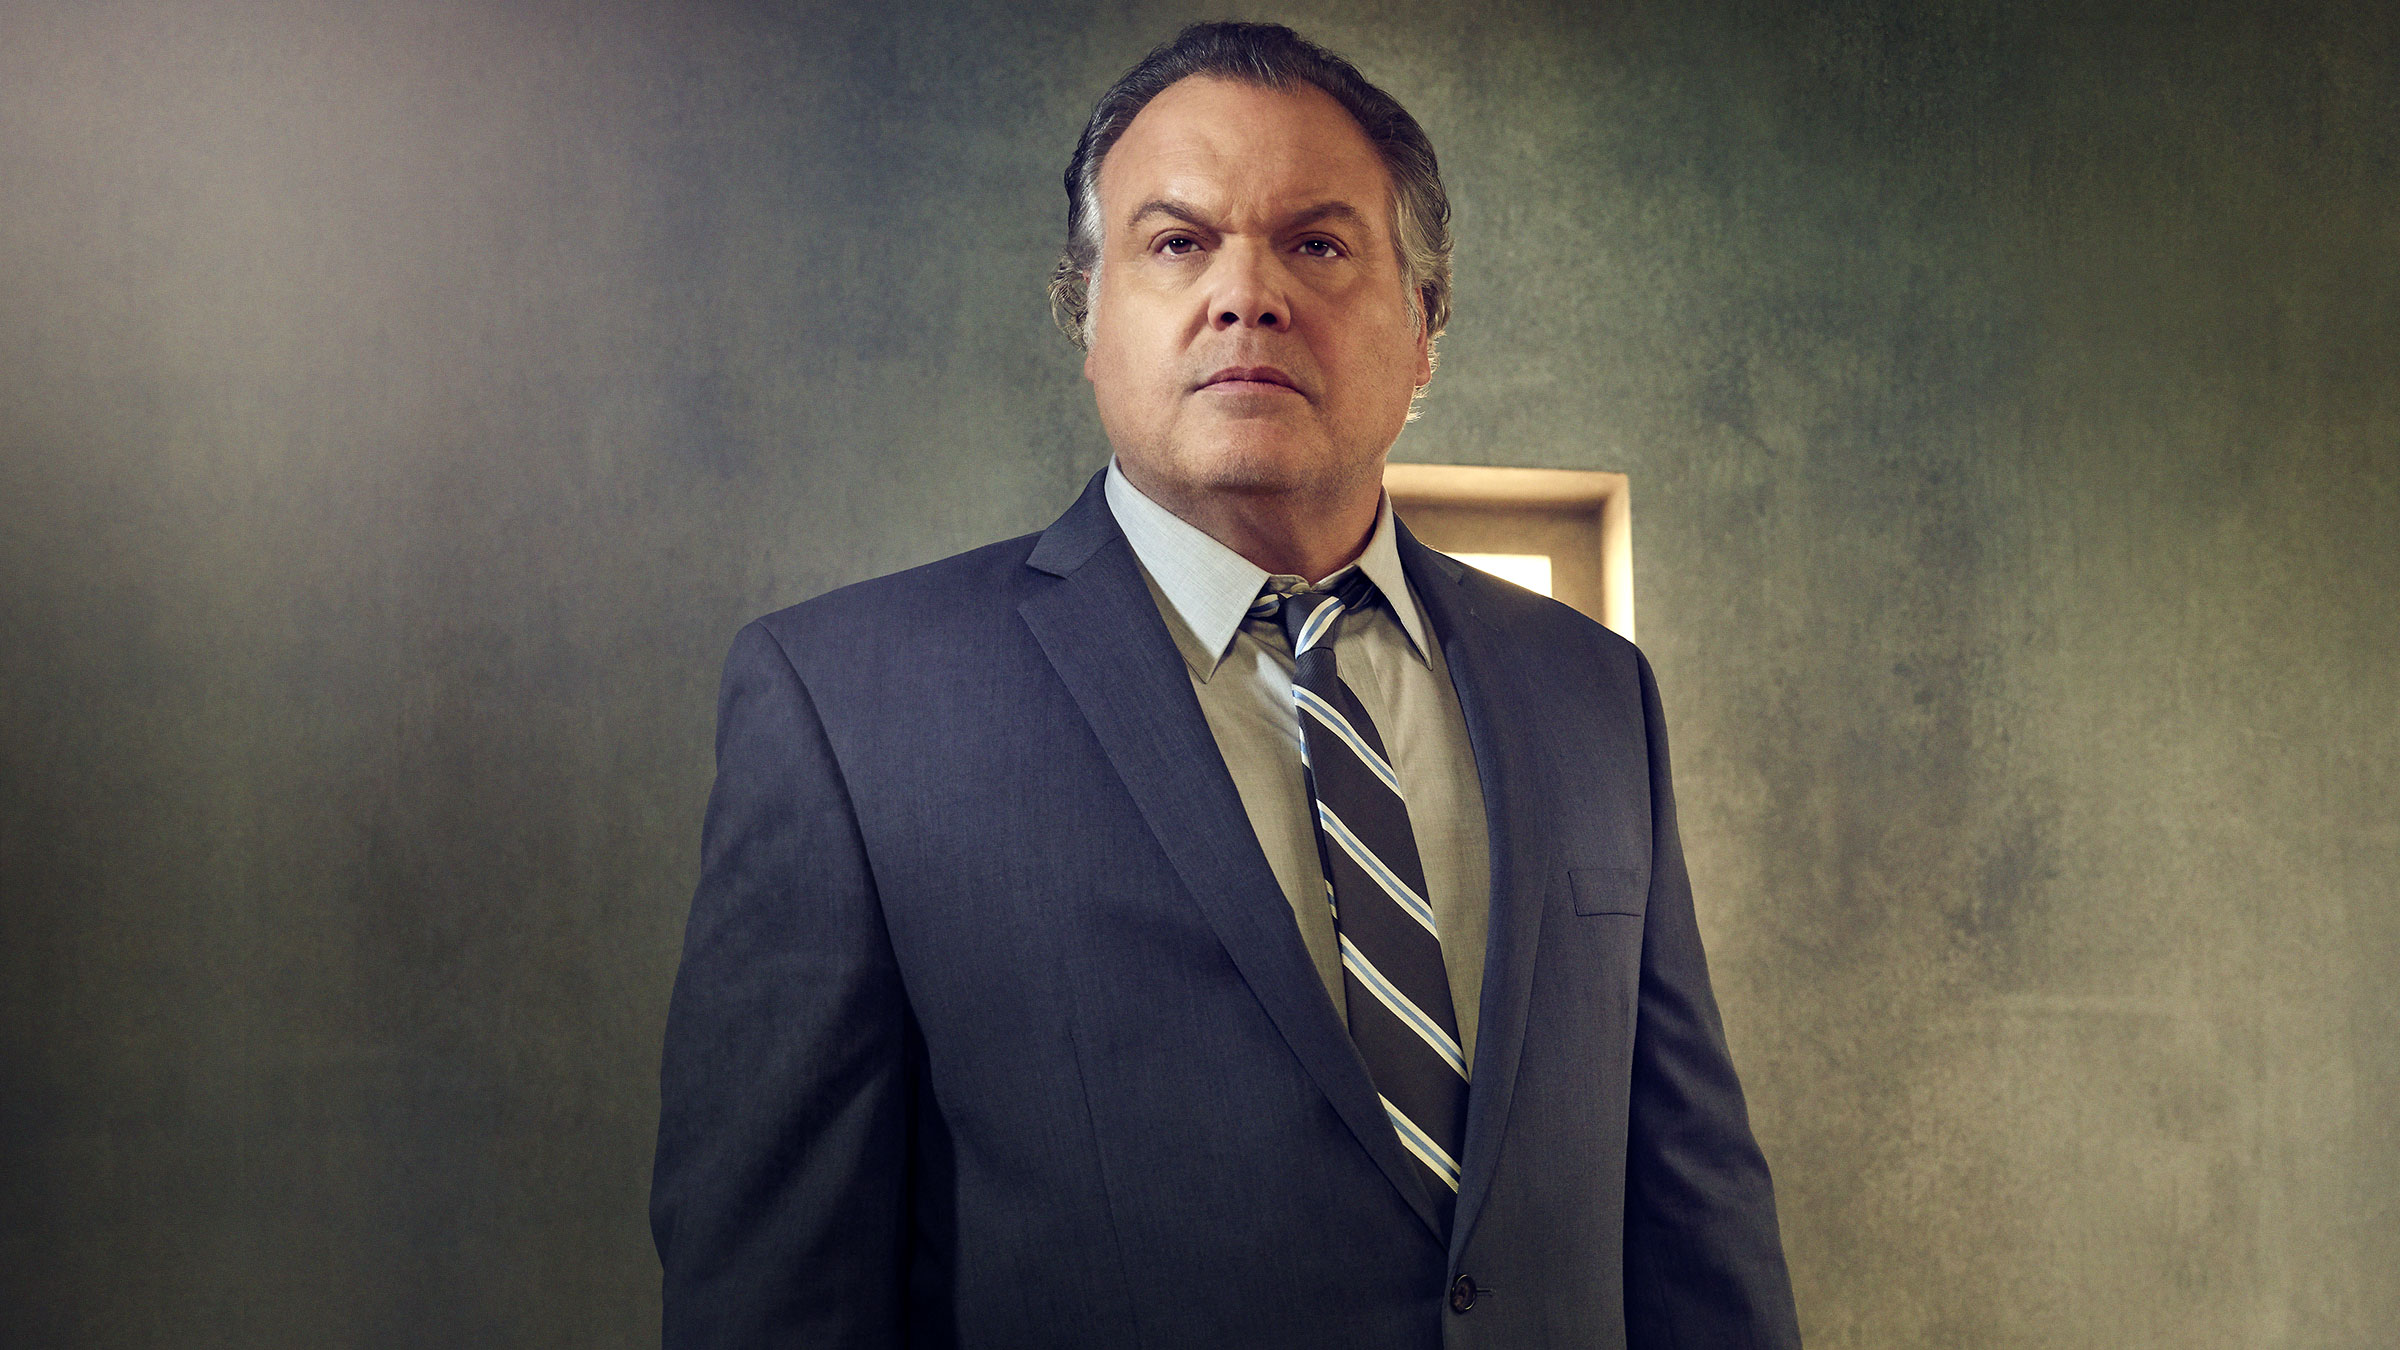 Vincent D'Onofrio as Sgt. Ian Lynch